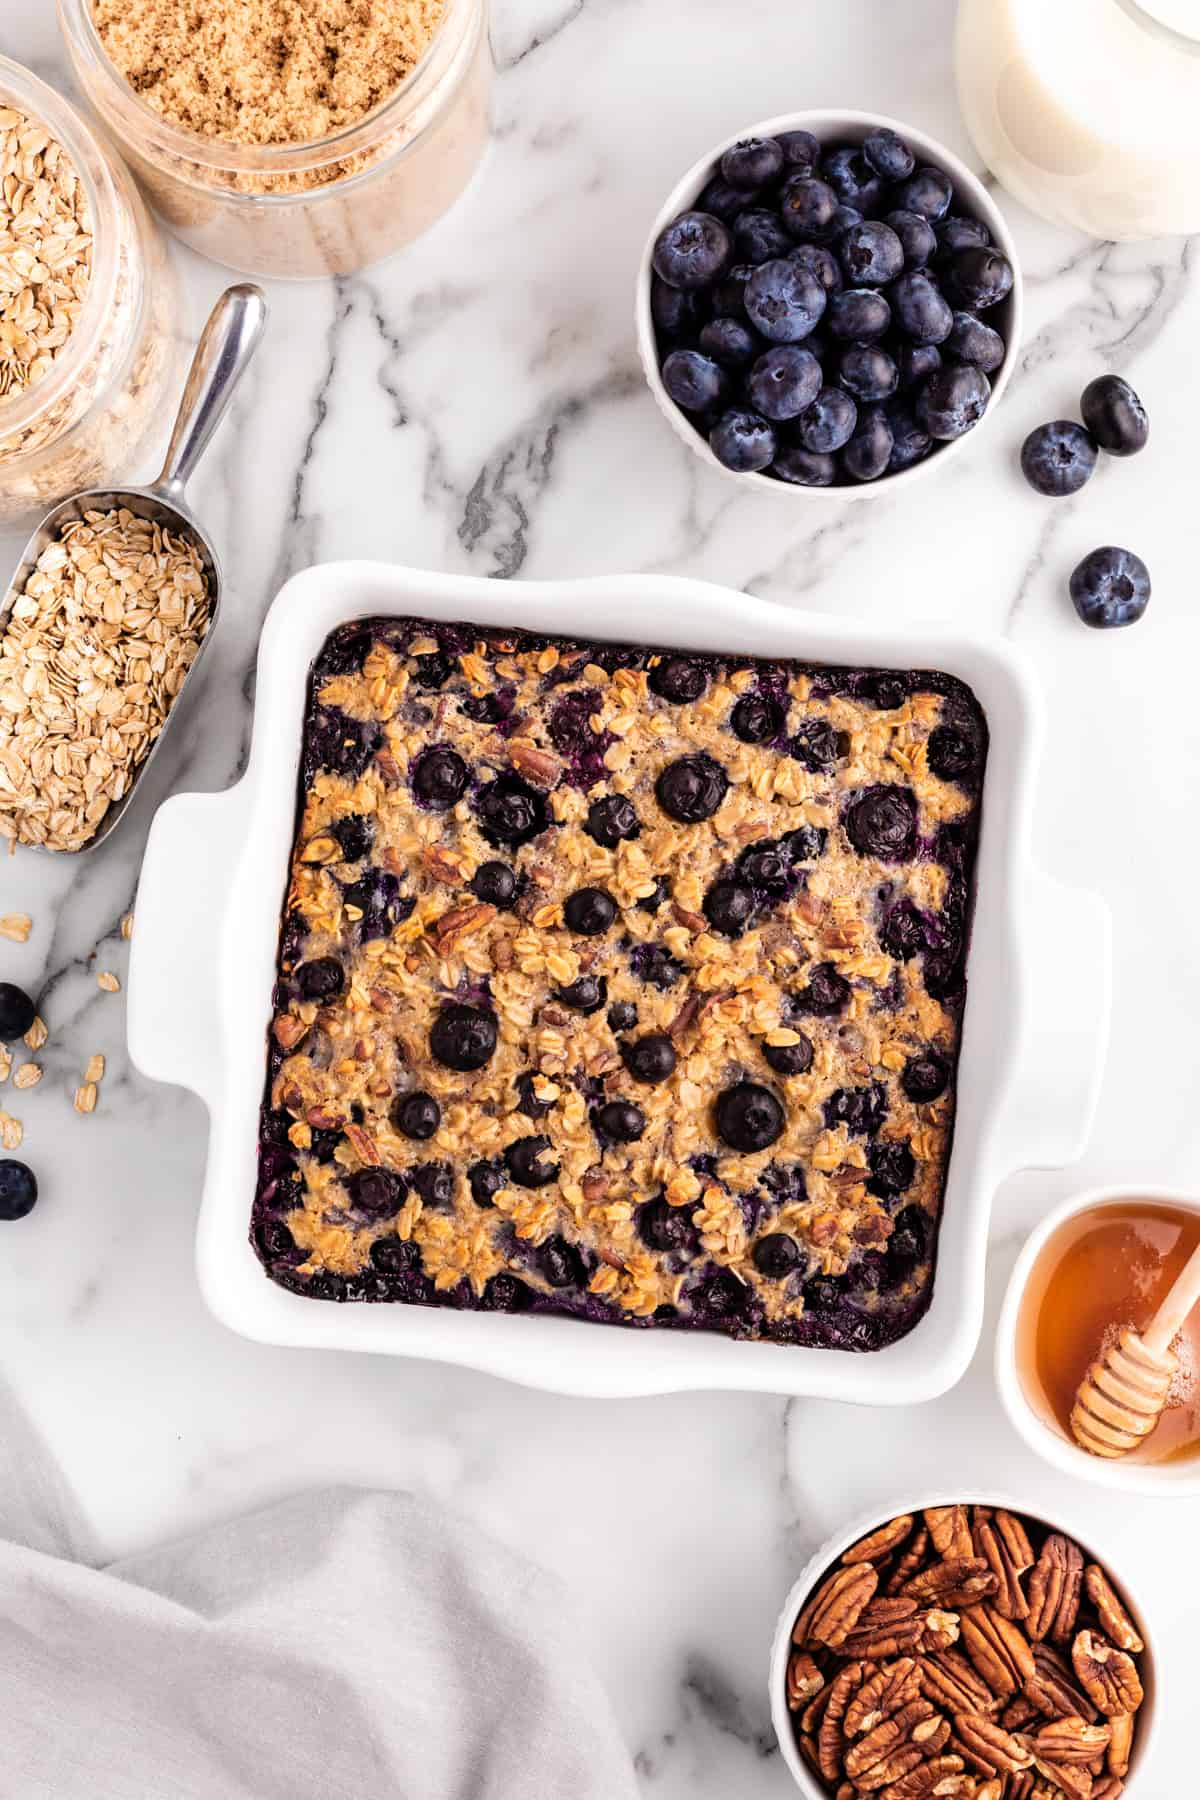 Blueberry Baked Oatmeal Recipe - The Cookie Rookie®